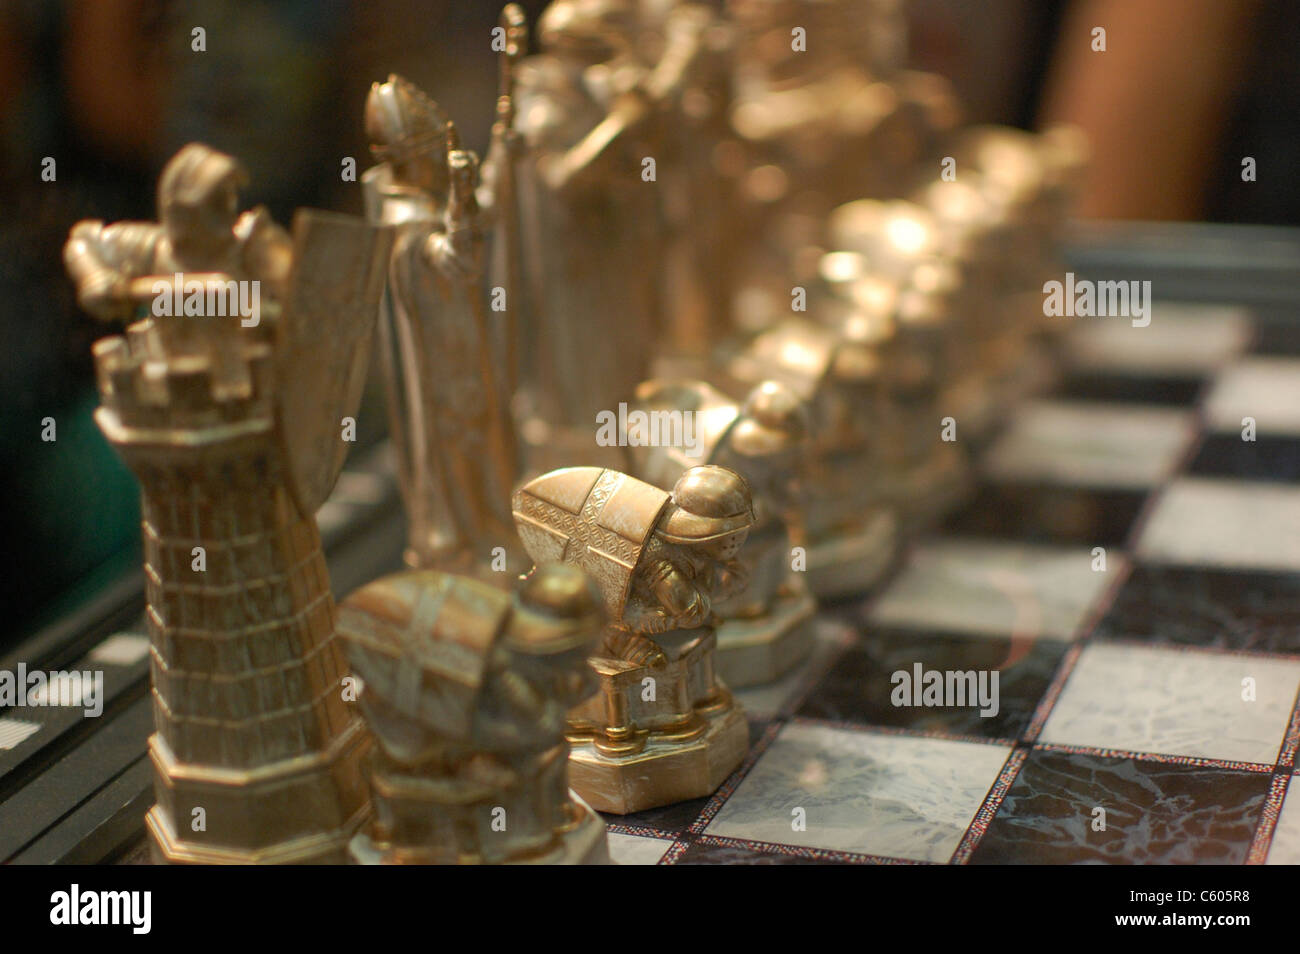 Wizards' Chess board, replica of the one from the film Harry Potter and the Philosophers Stone Stock Photo